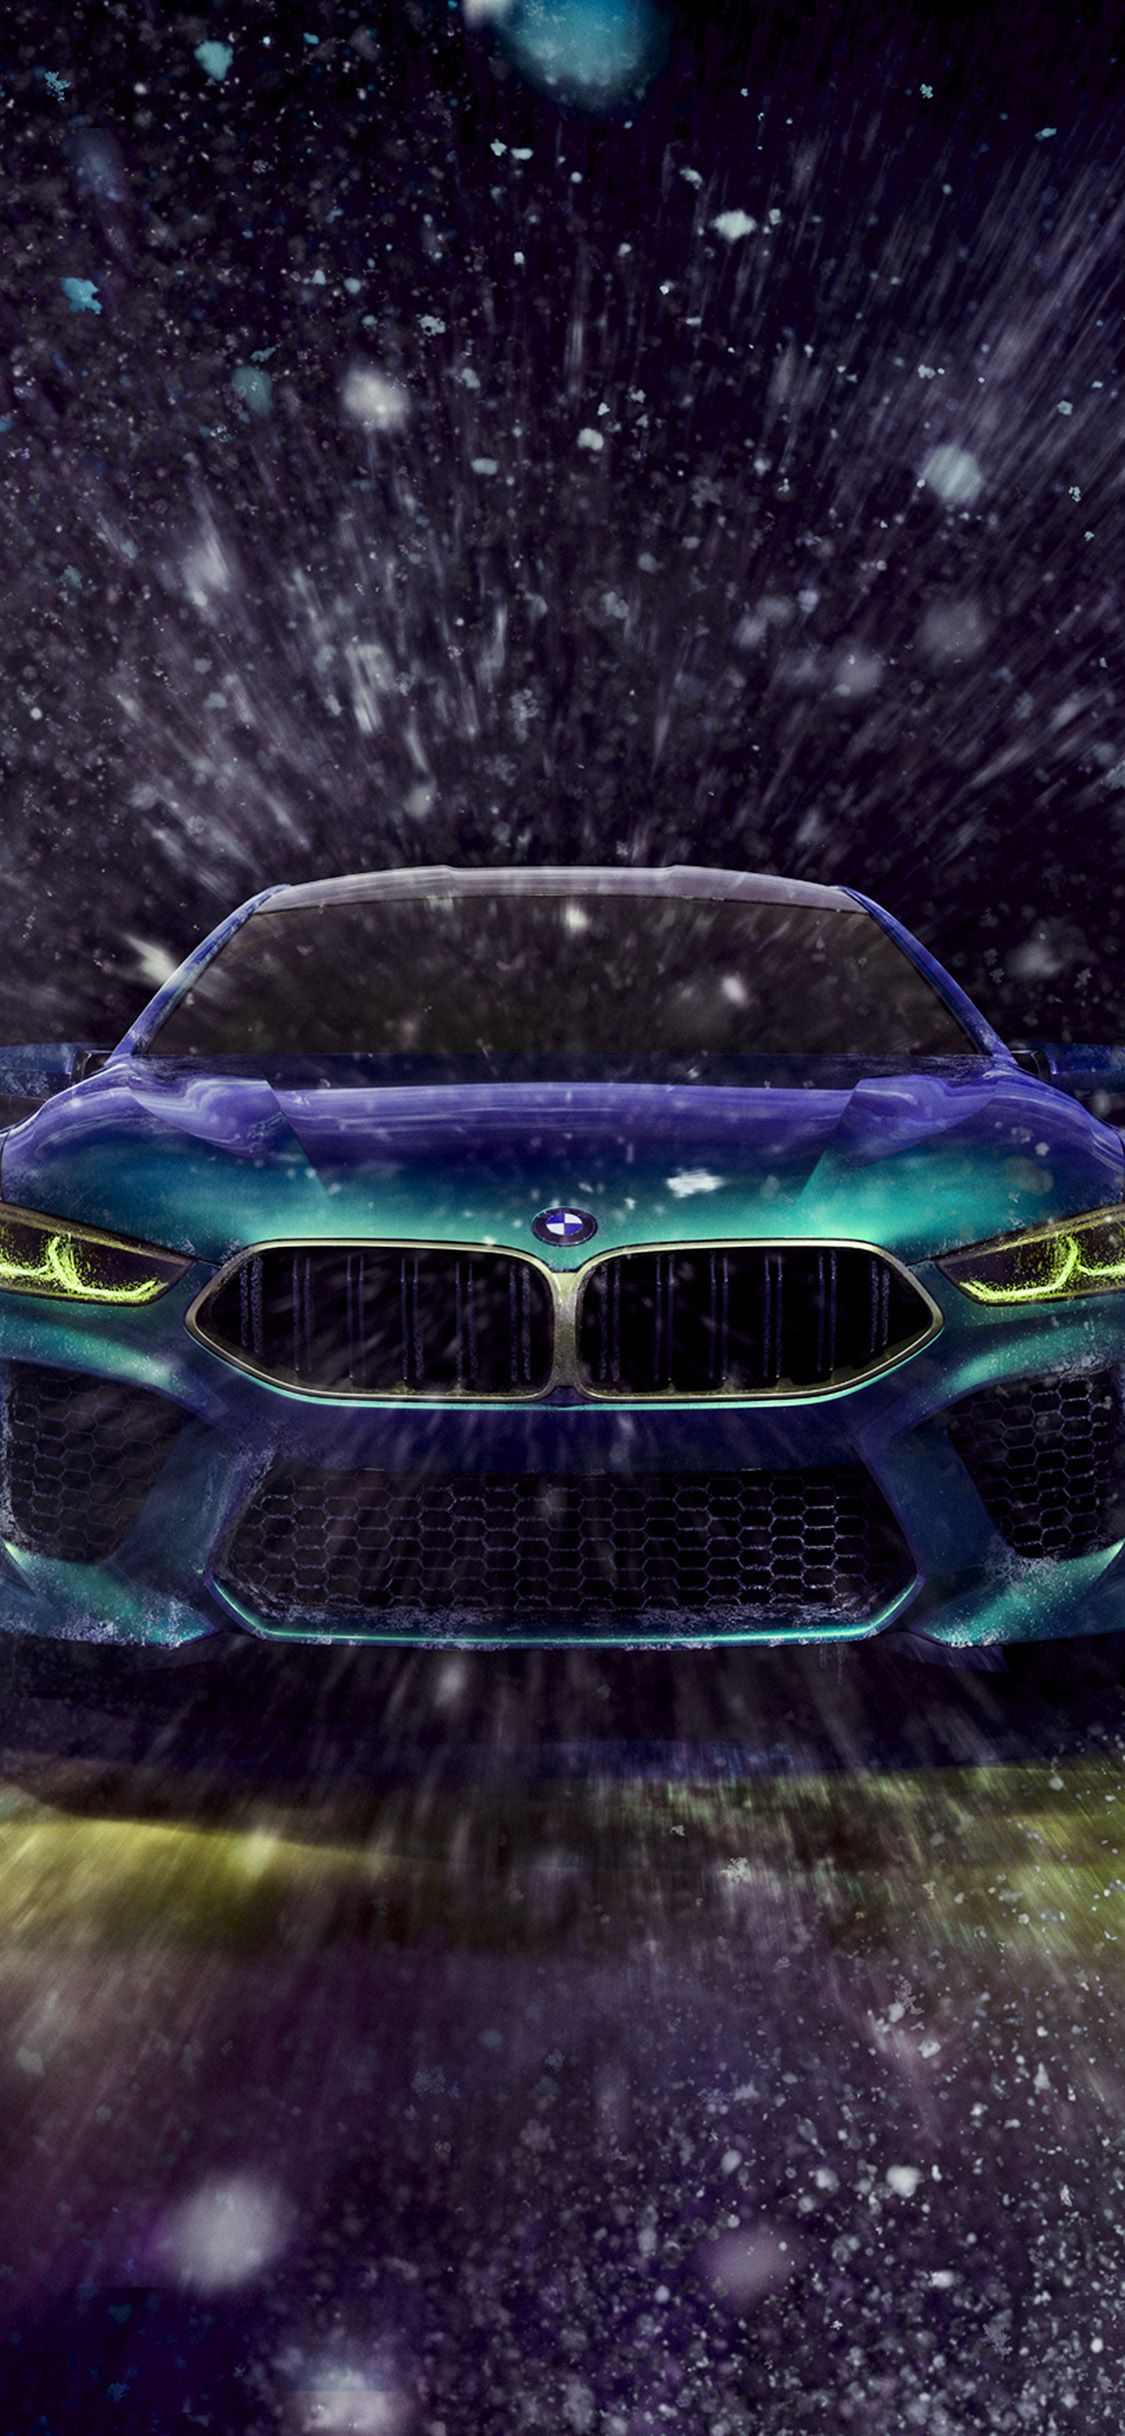 BMW M8 Gran Coupe wallpaper for iPhone and Android - BMW